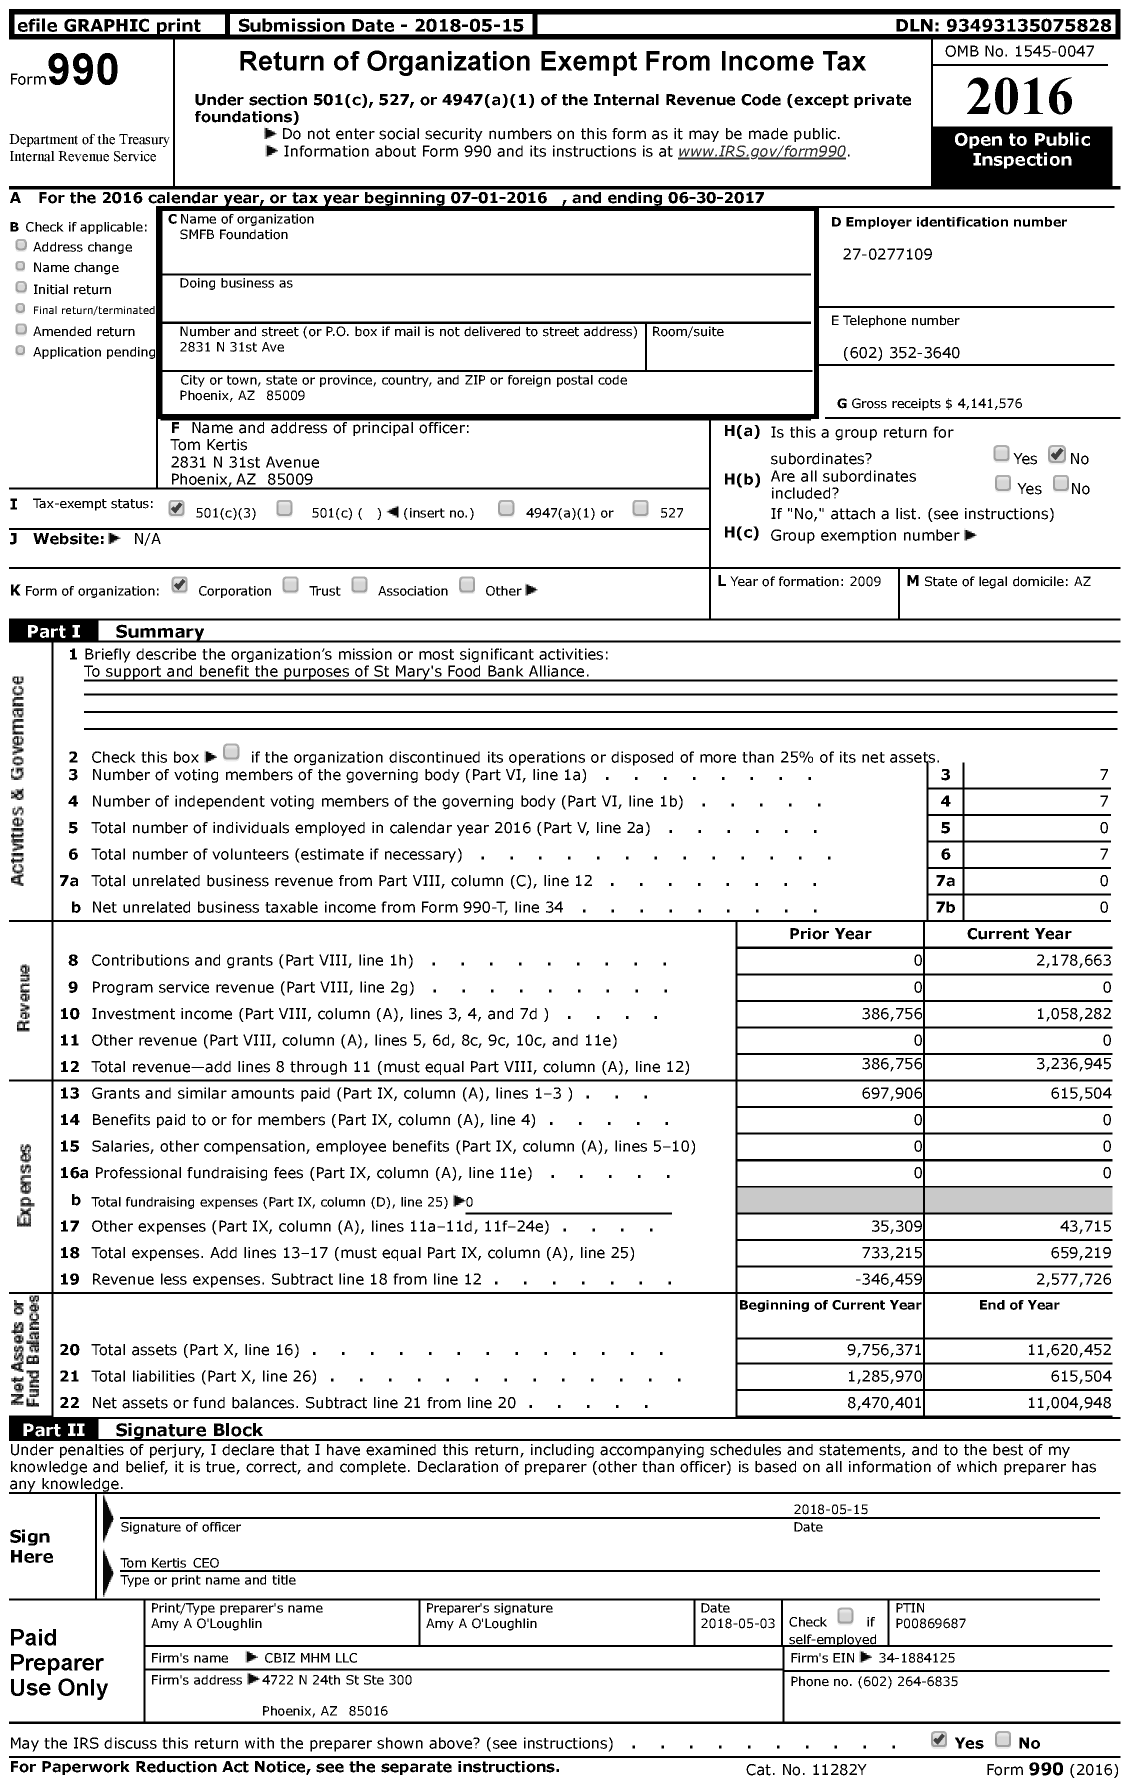 Image of first page of 2016 Form 990 for SMFB Foundation